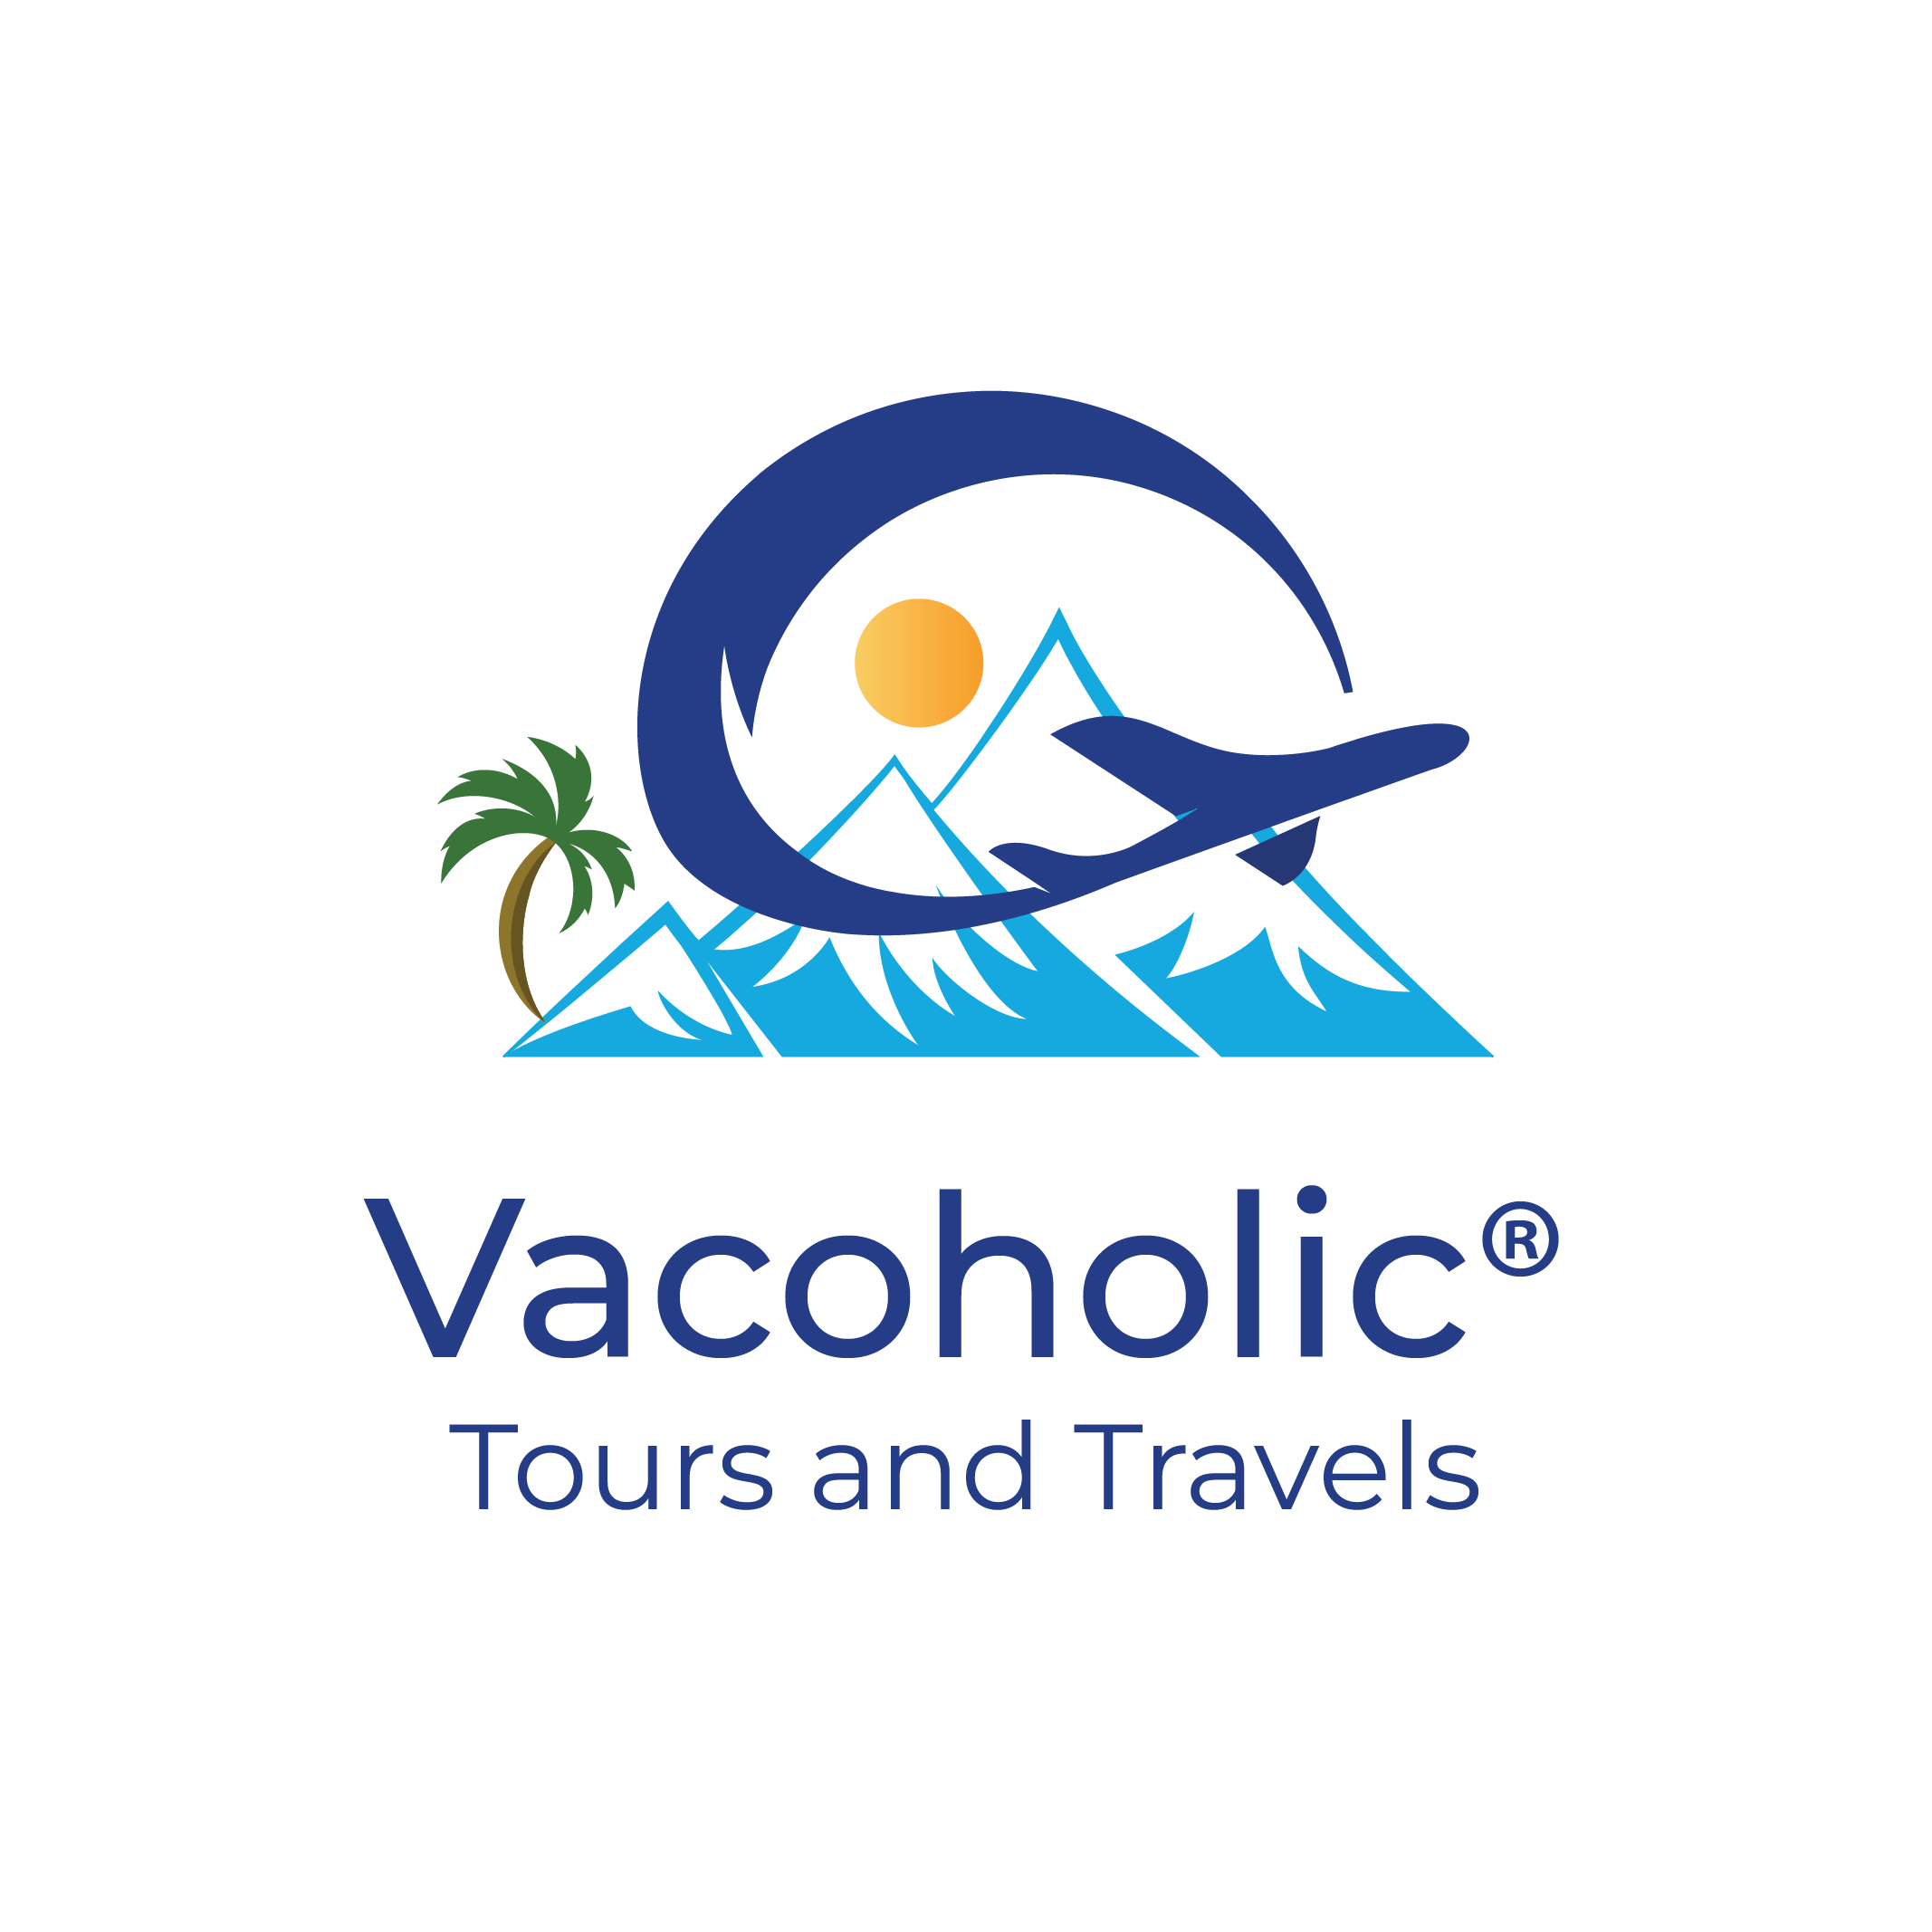 Vacoholic Tours And Travels